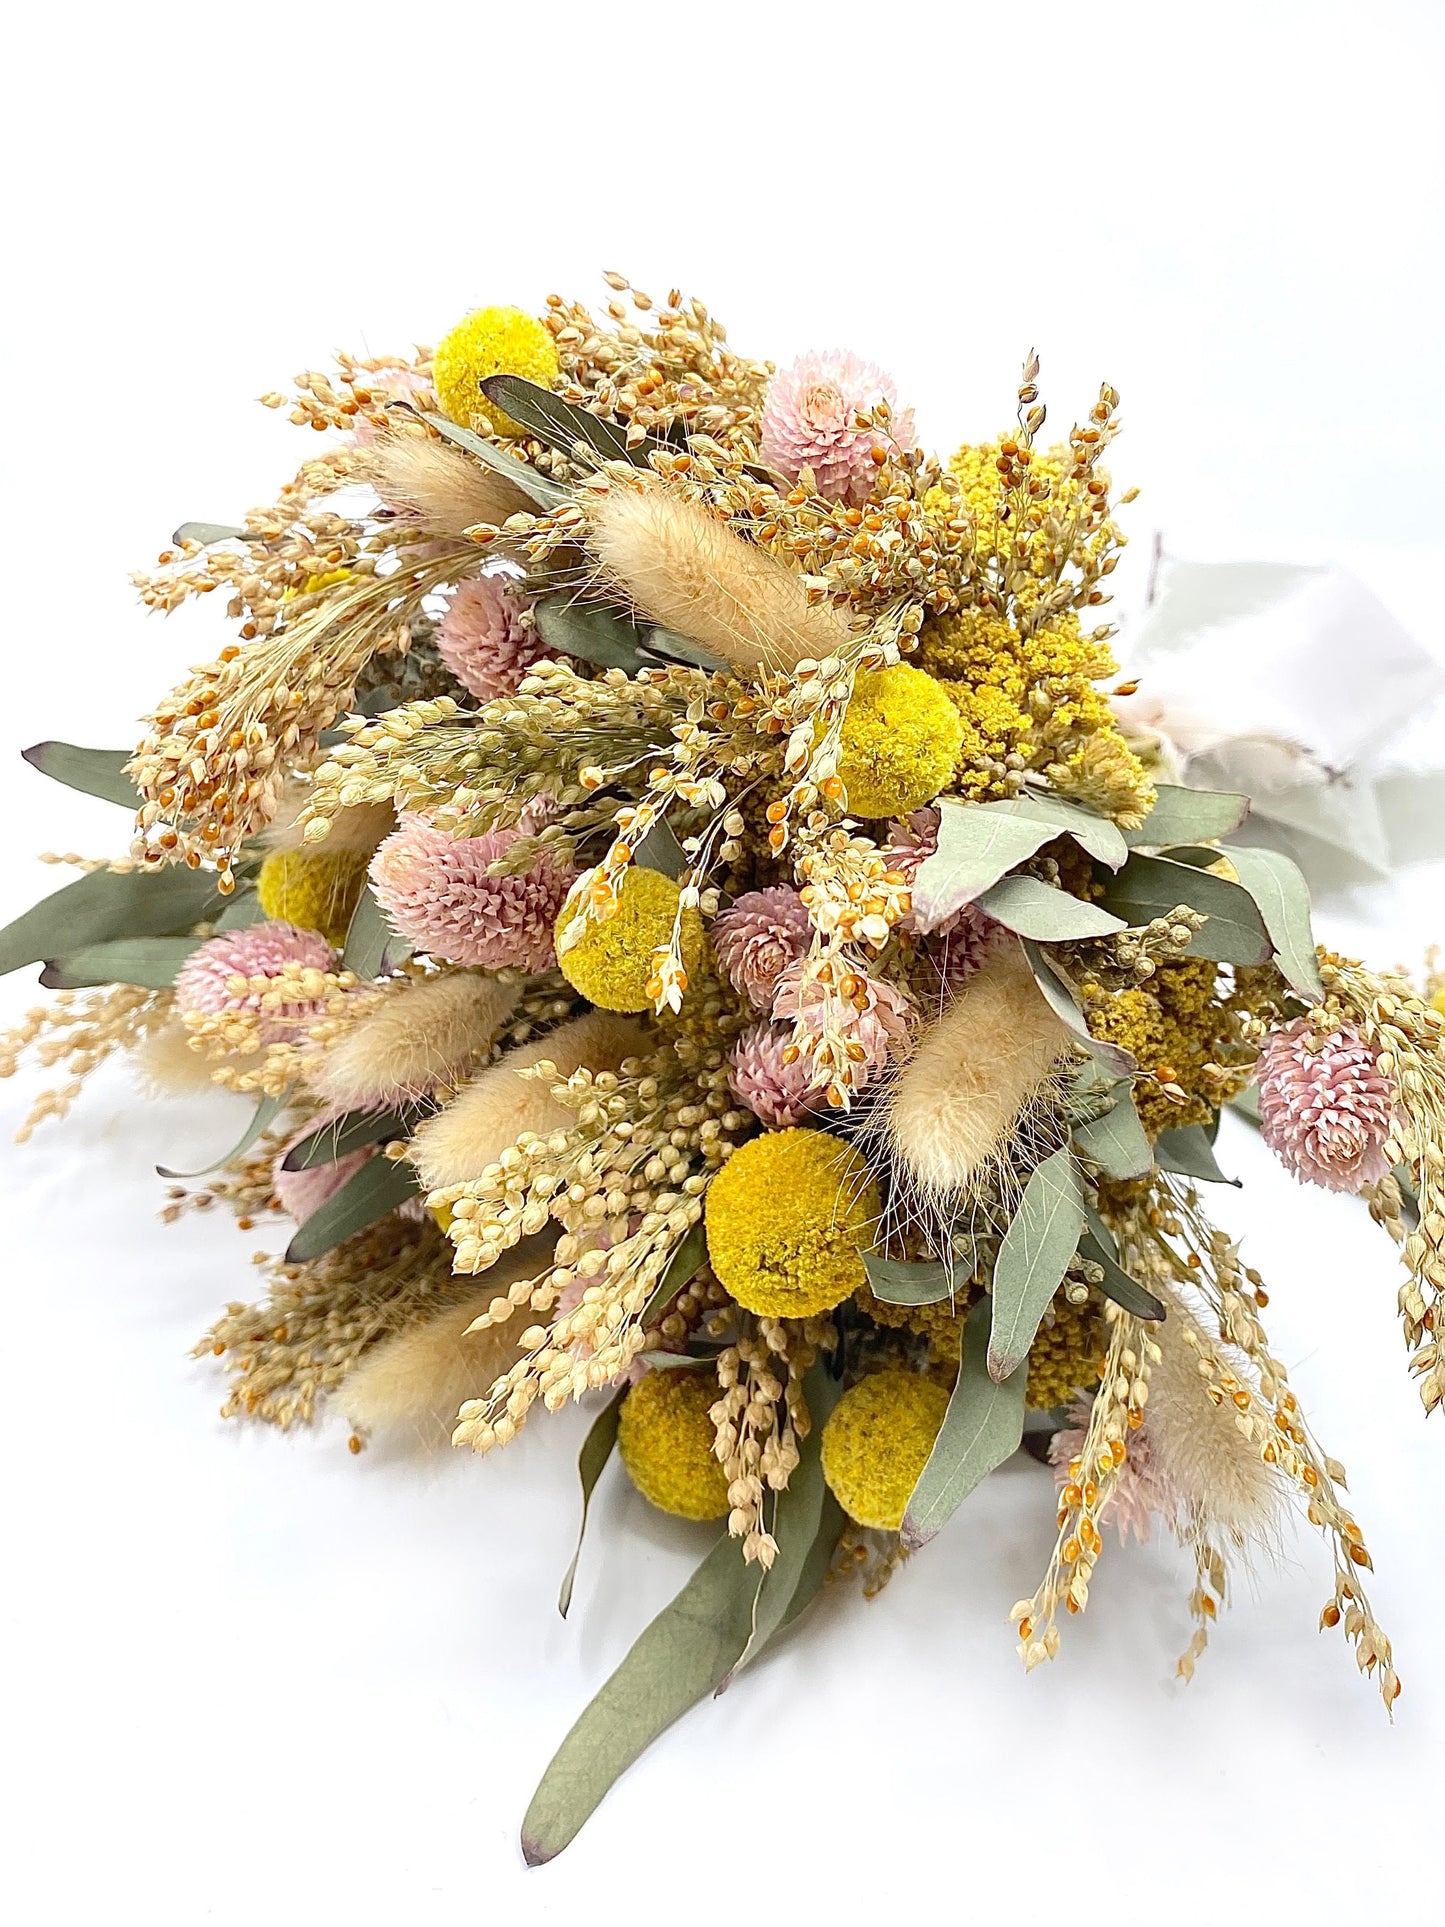 Summer Bouquet, Dried Florals,  Wedding Flowers,  Pink and Yellow, Throw Bouquet, Greenery, Light colors, Summer Florals, Bridal,Anniversary